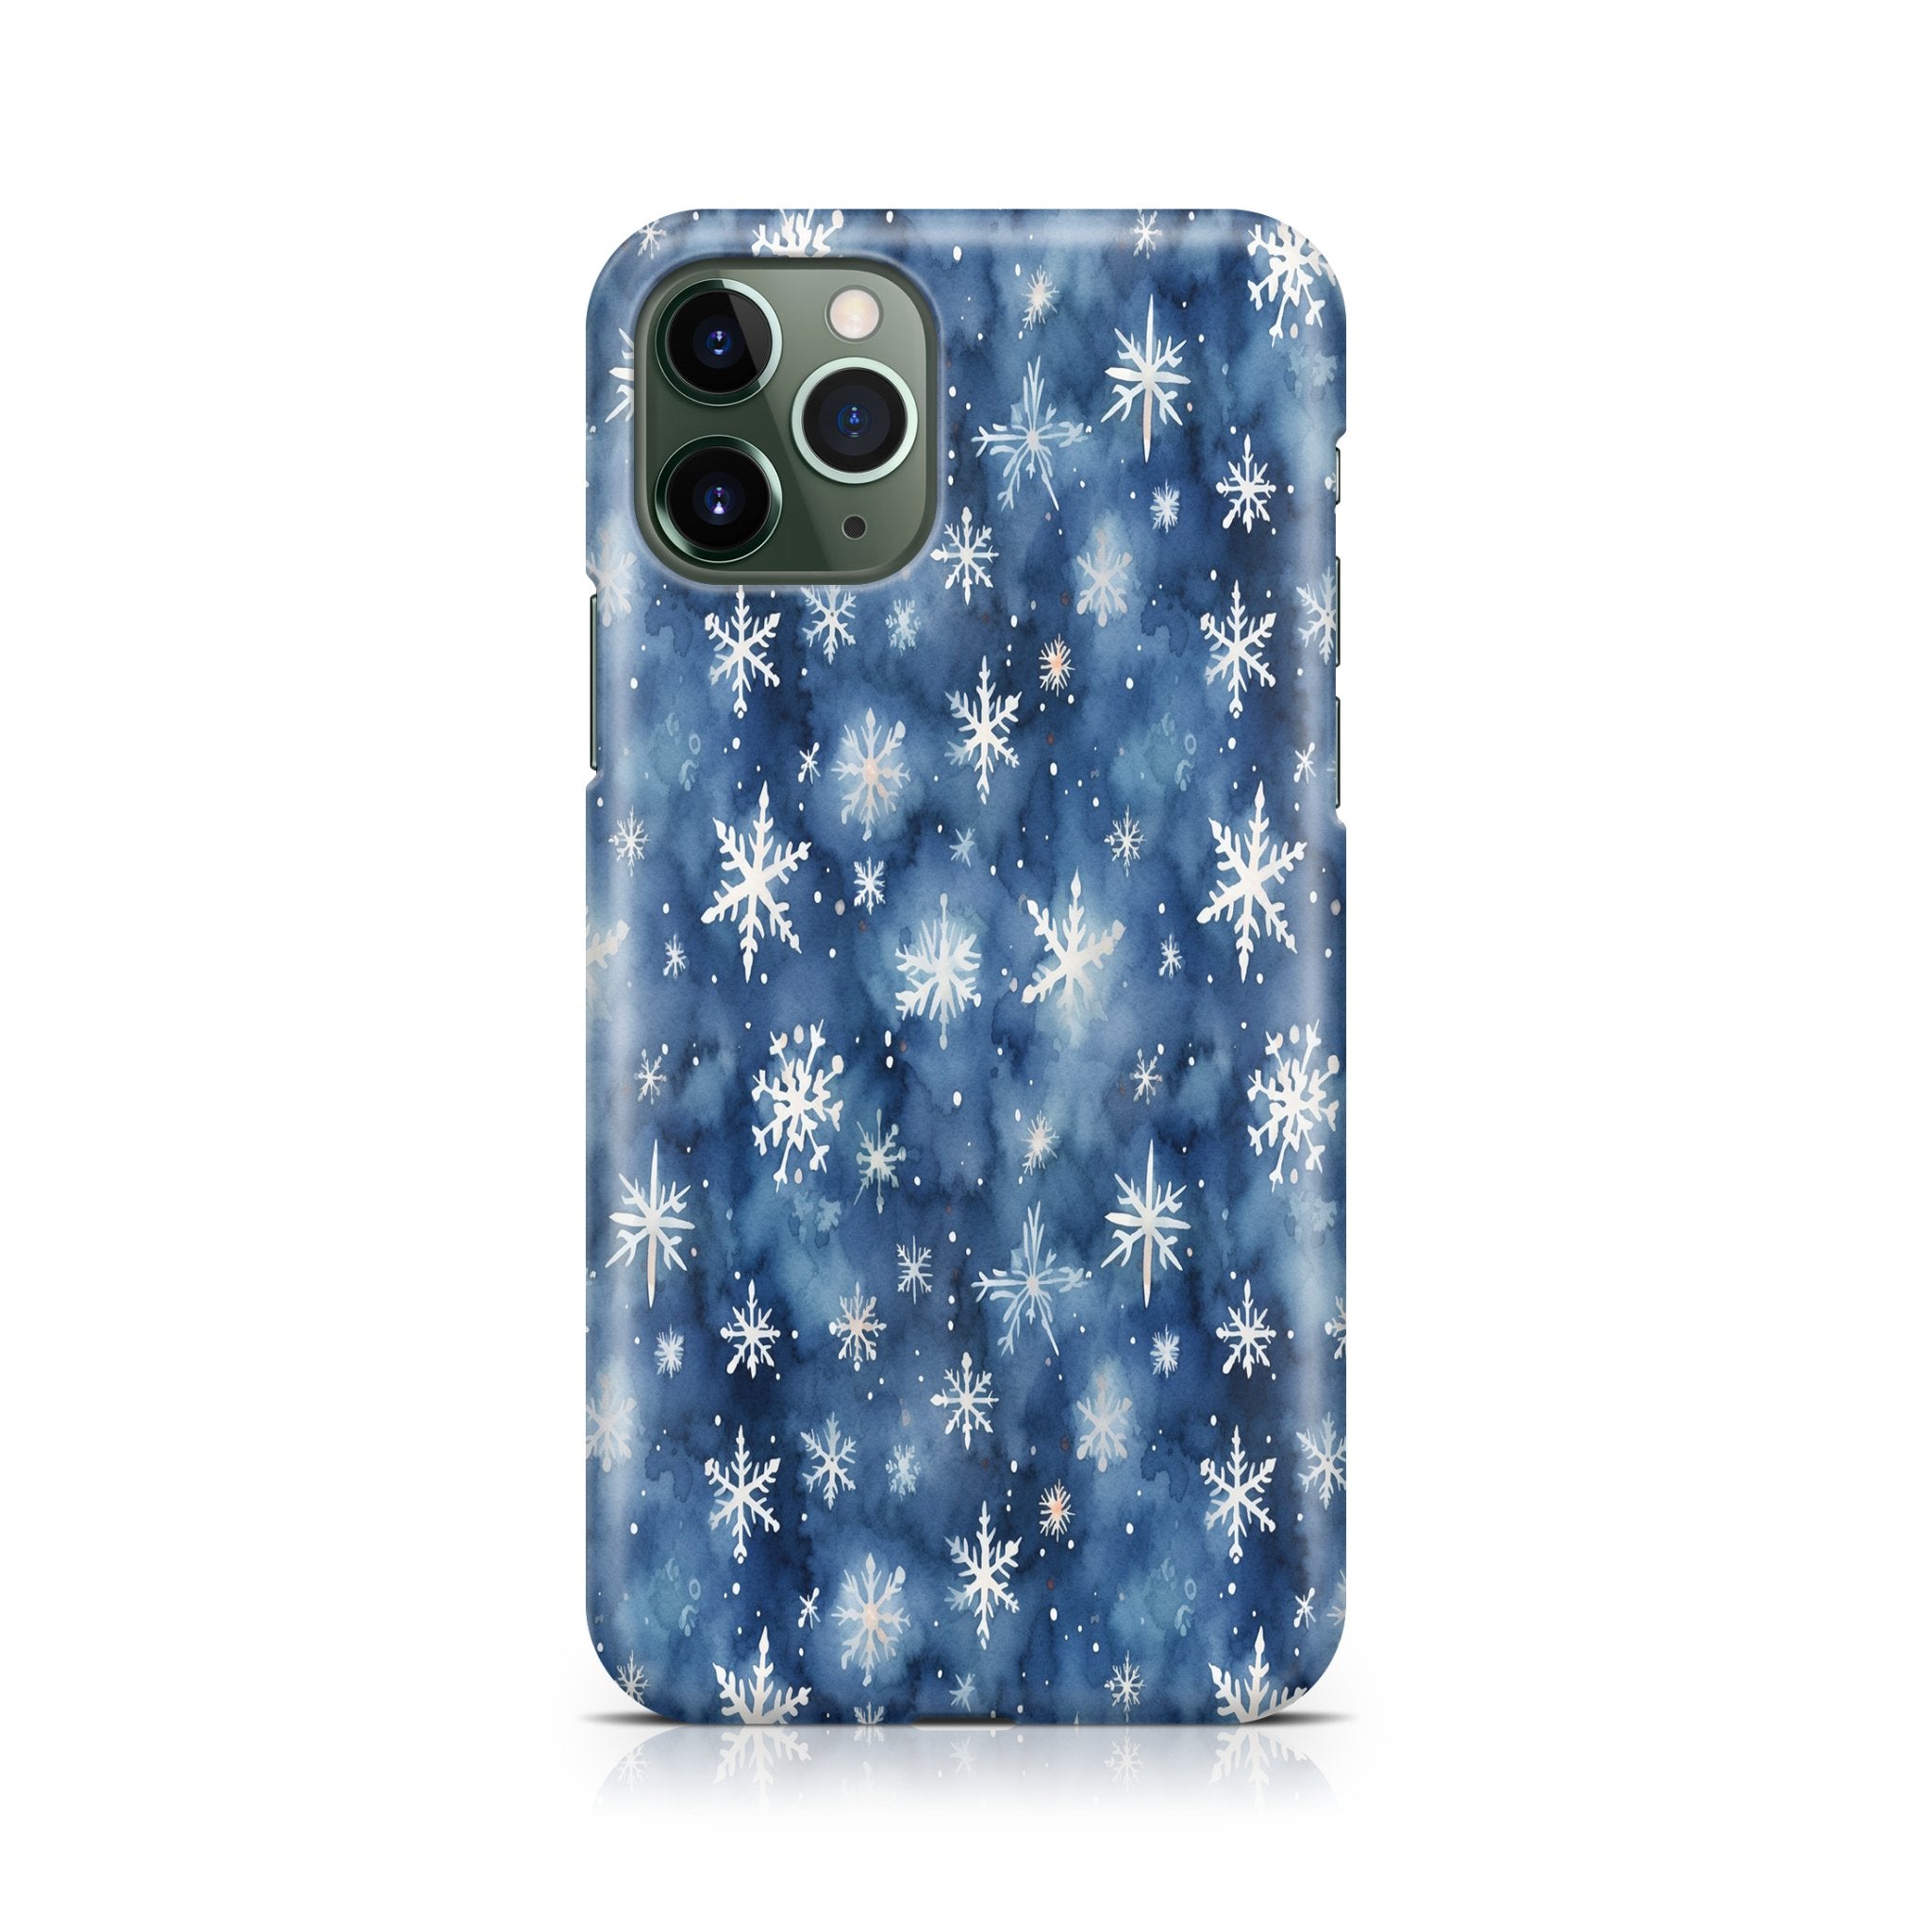 Winter Serenity - iPhone phone case designs by CaseSwagger